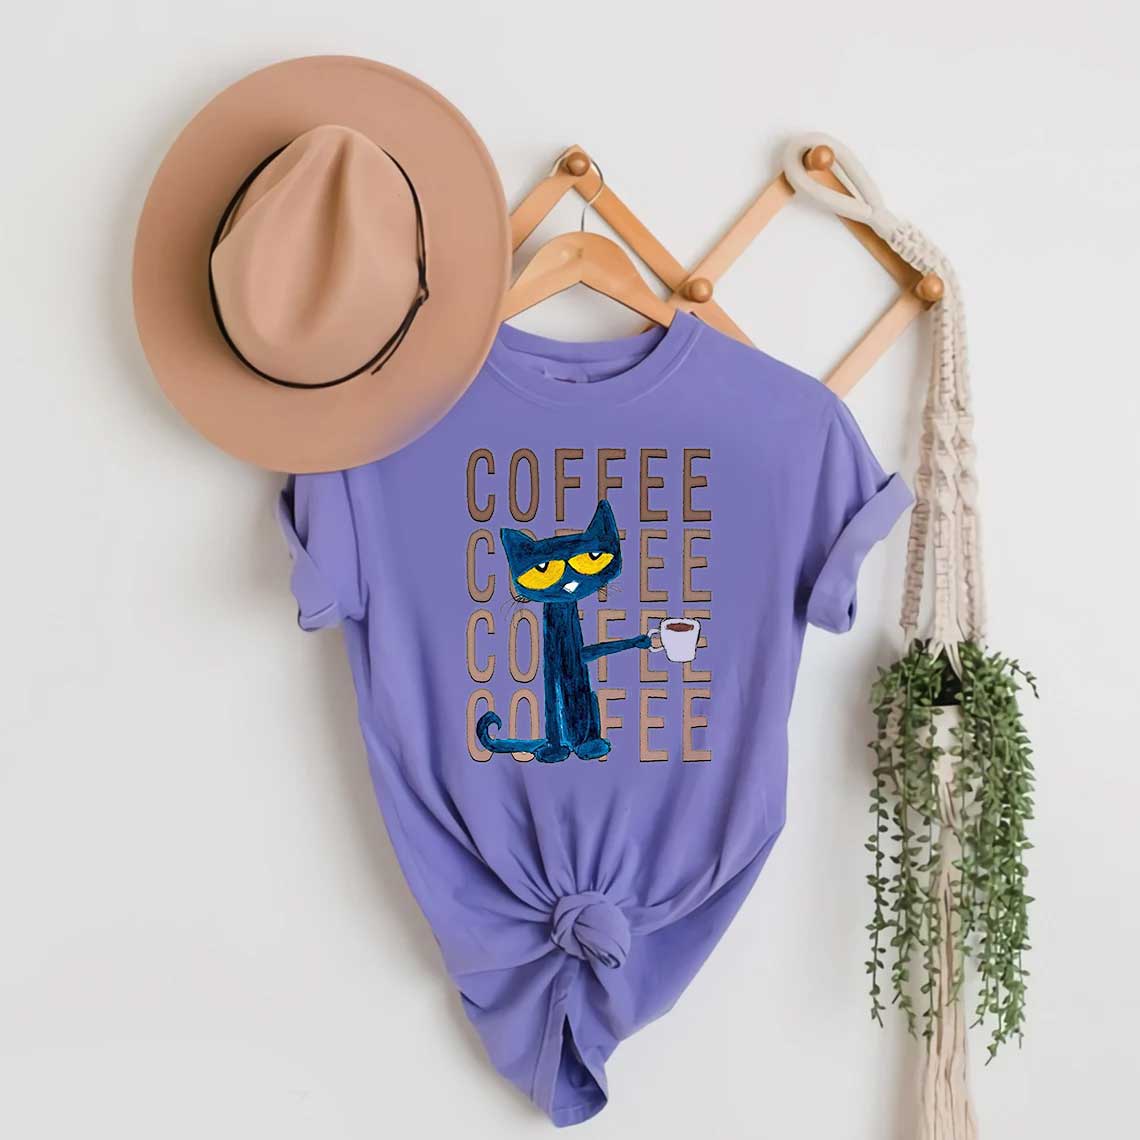 Pete The Cat Coffee Shirt, Groovy Shirt, Pete The Cat Party Shirt, Custom Name And Age Shirt, funny cat shirt, Pete The Cat fan gift